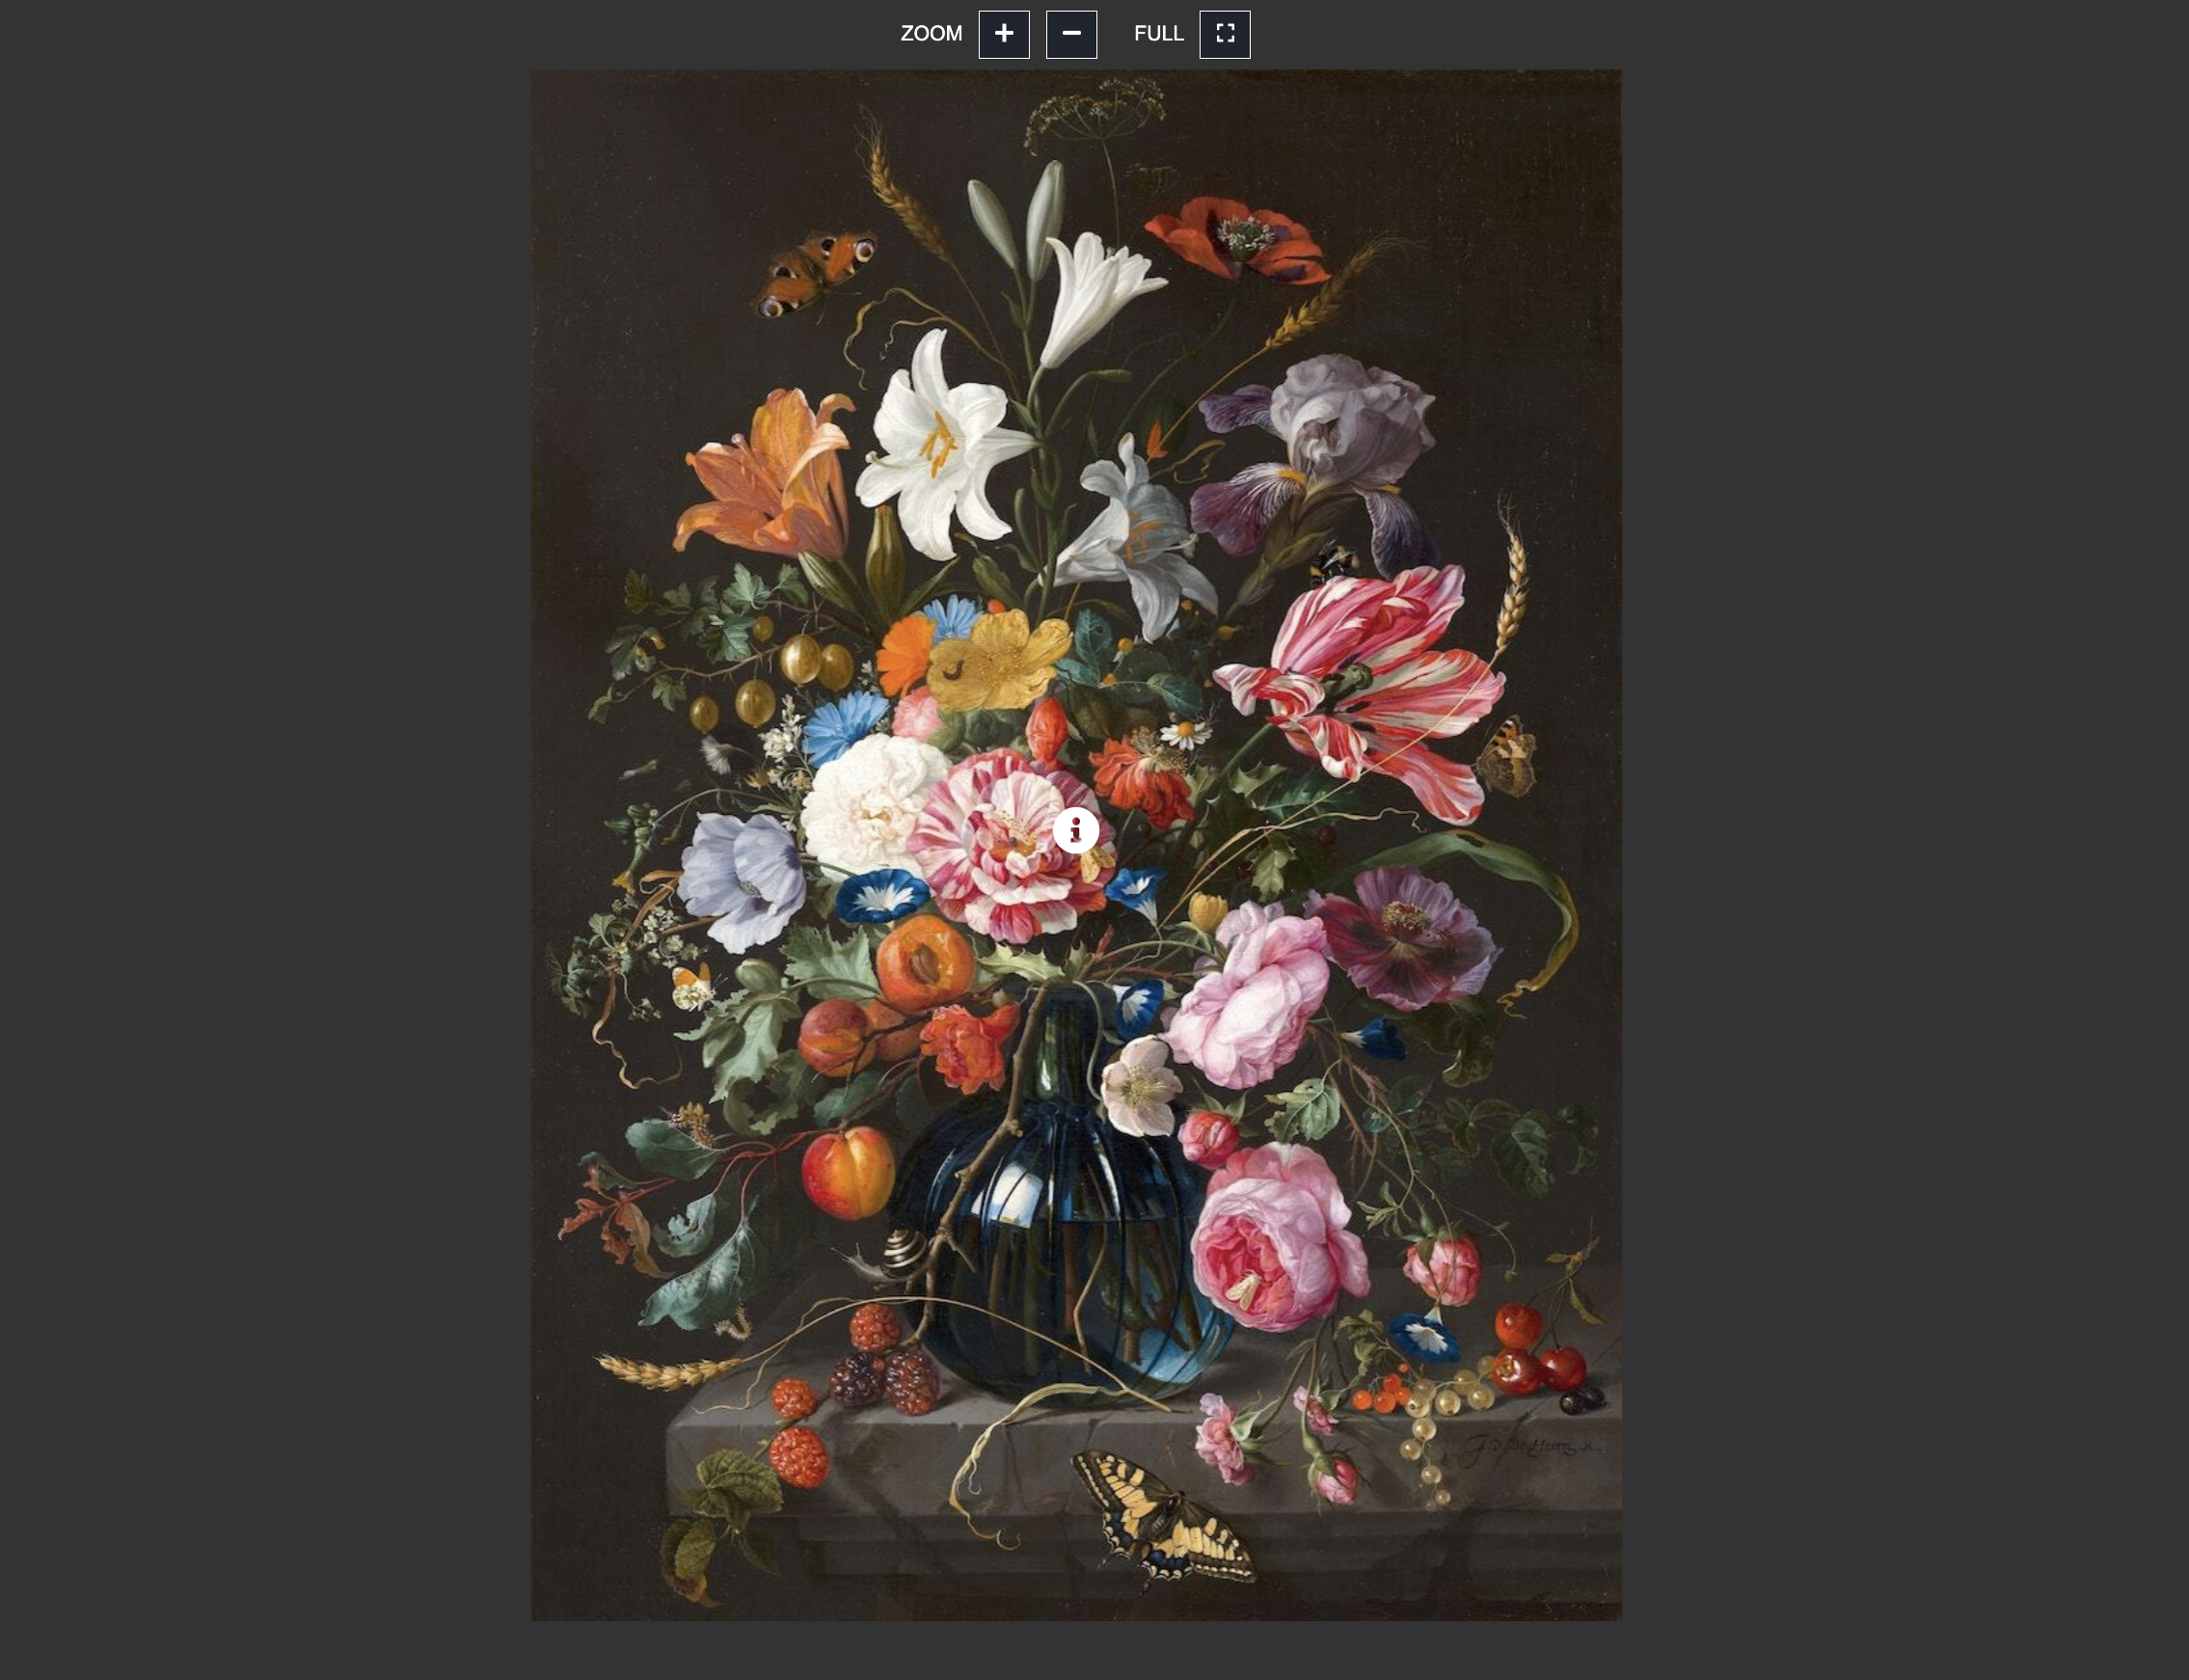 image of painting of vase with lots of flowers and fruits showing full view zoomed out